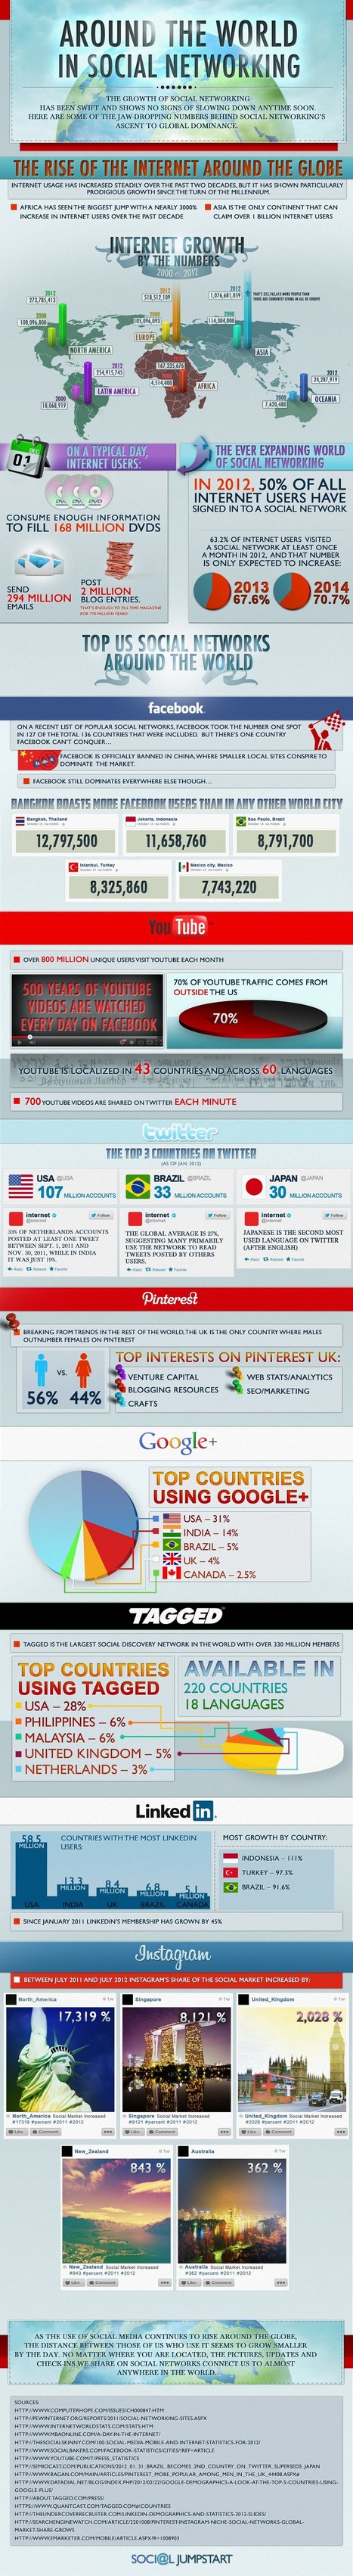 Social Media Around the World: A Complete Infographic Guide | Latest Social Media News | Scoop.it